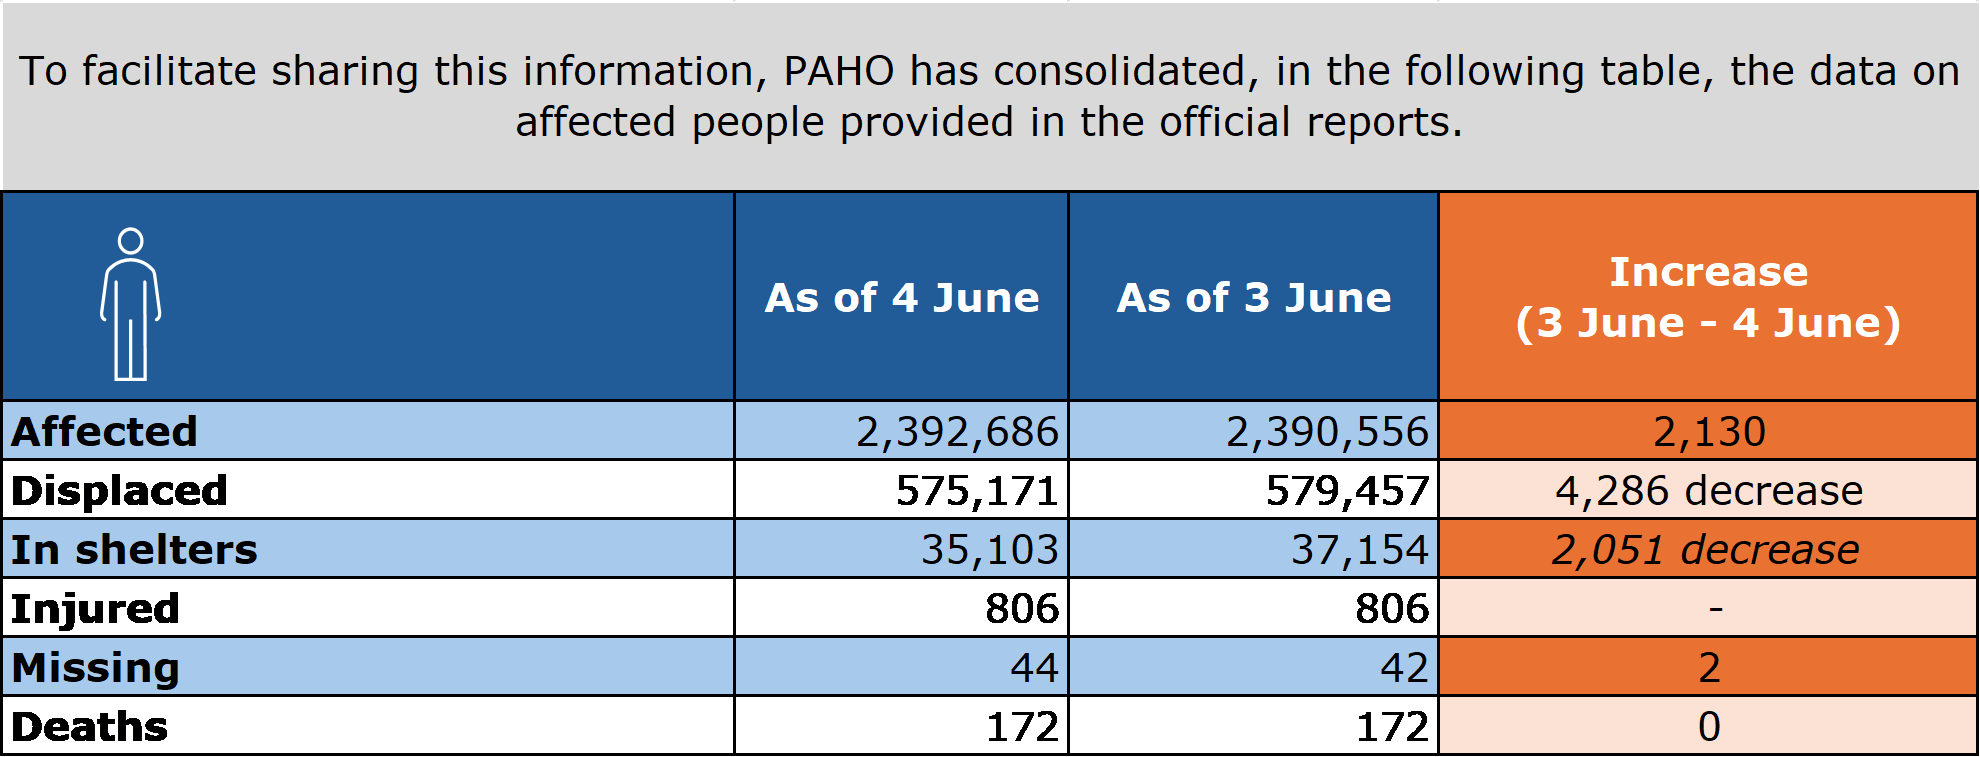 Table. Data on affected persons. The information is available in the official reports.